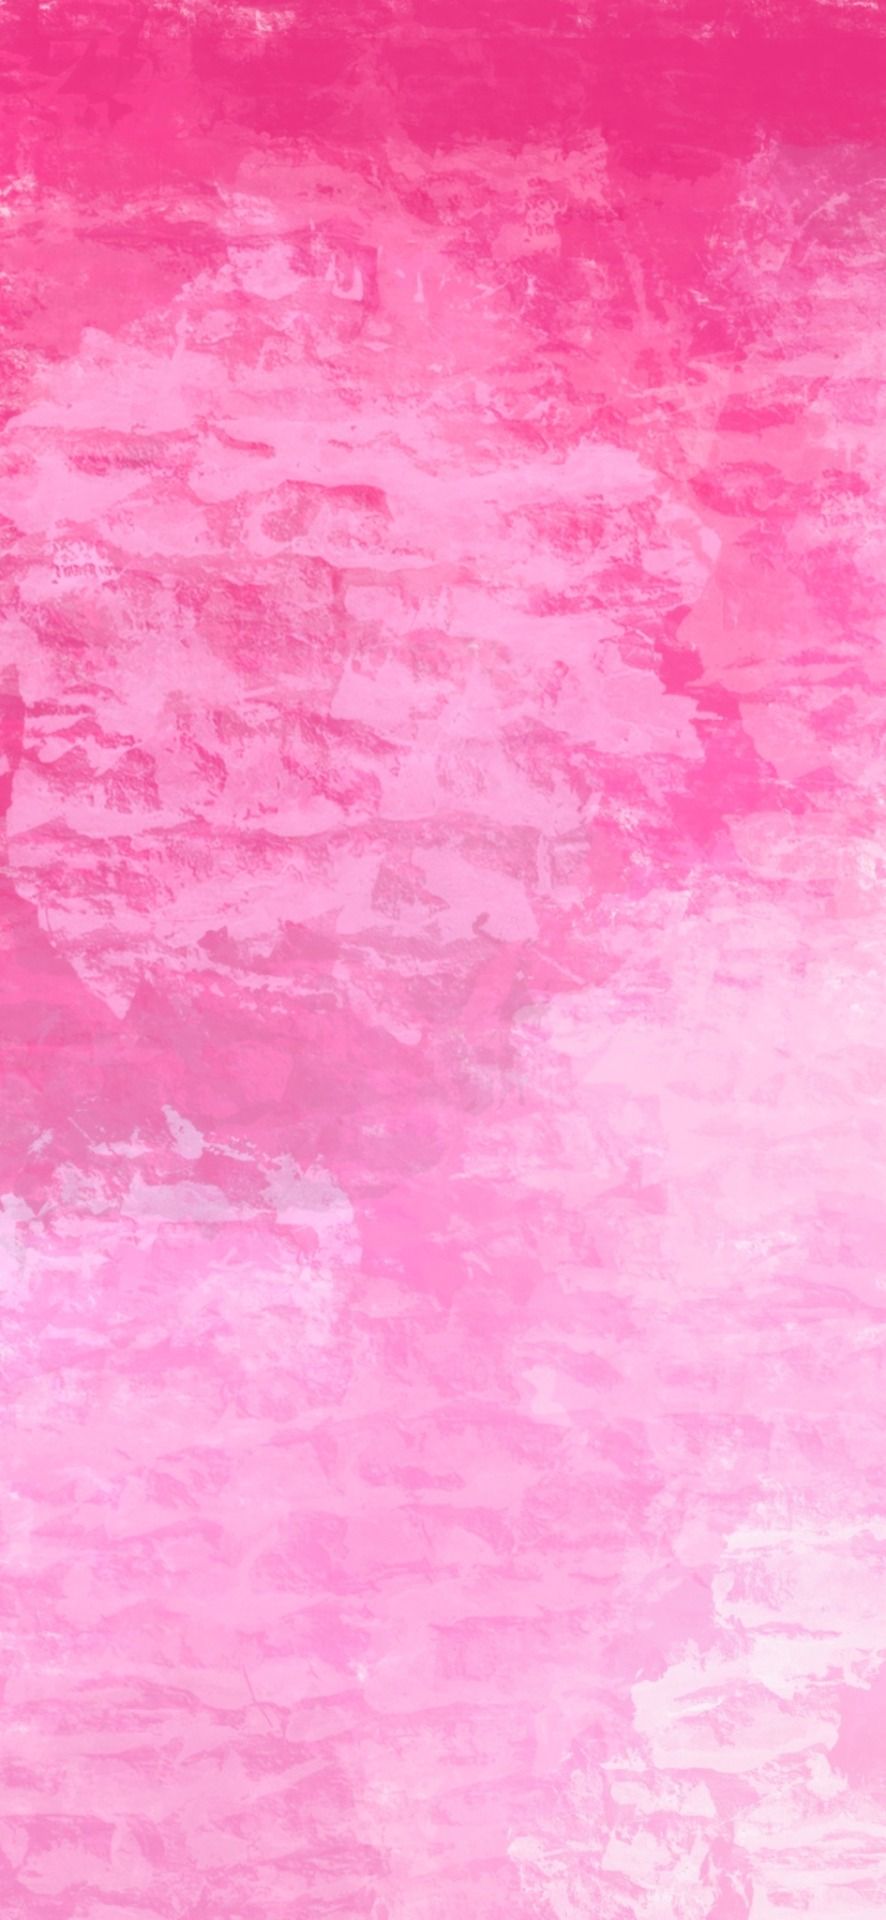 A pink and white watercolor background - Baddie